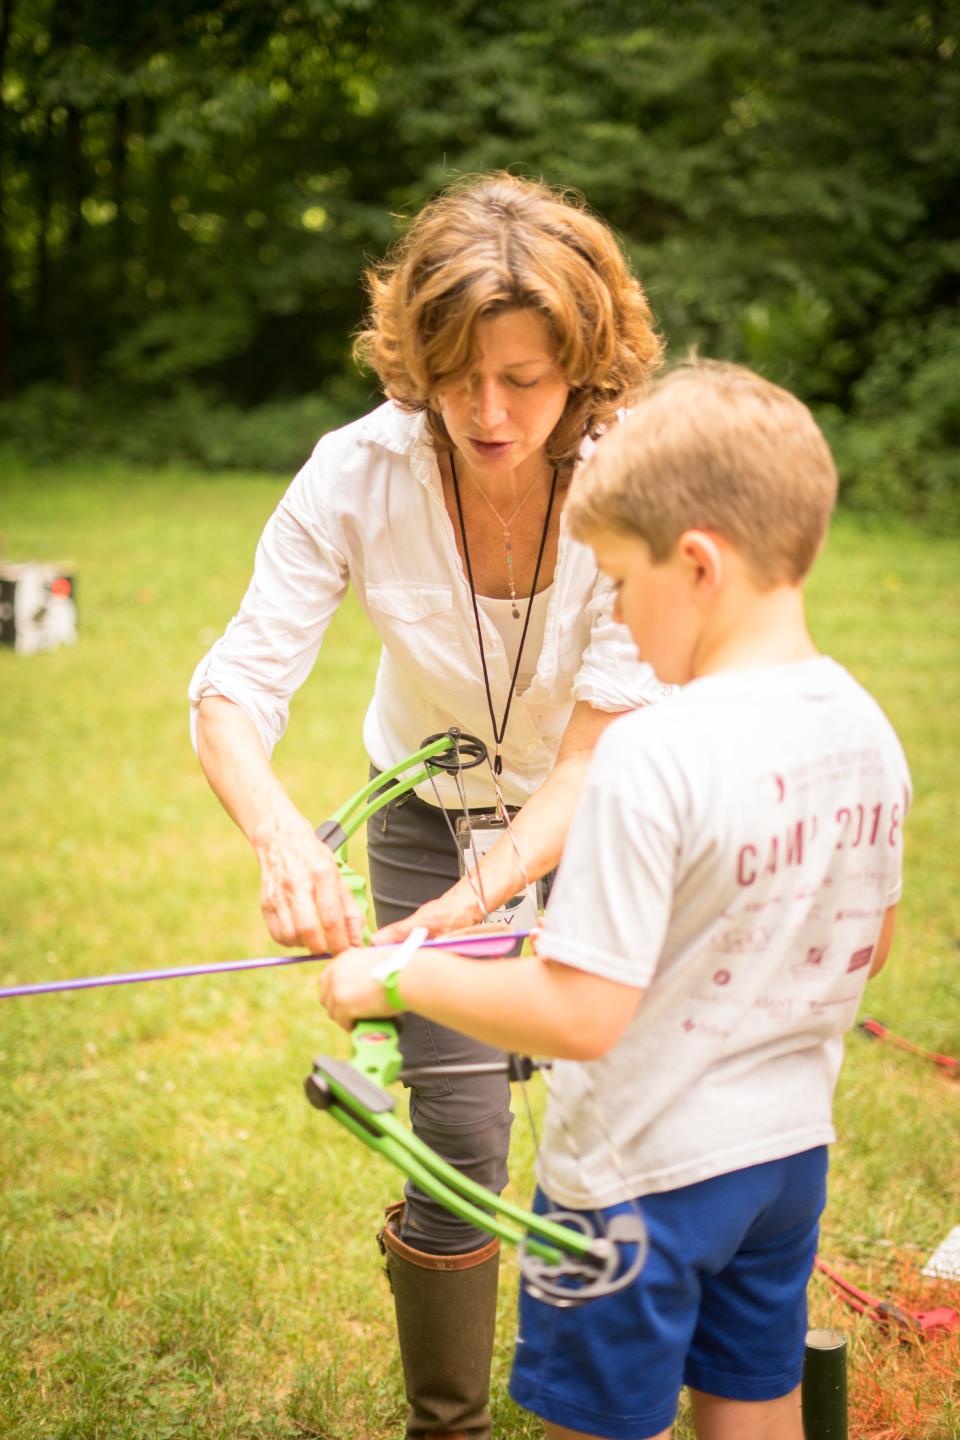 A 2019 picture of Amy Grant teaching archery at Barefoot at the Farm, a Christian day camp held on Grant's Williamson County farm each summer. The camp aims to bring together children of different races, economic levels and cultures. Half the camp's spots are reserved for children from low-income families.